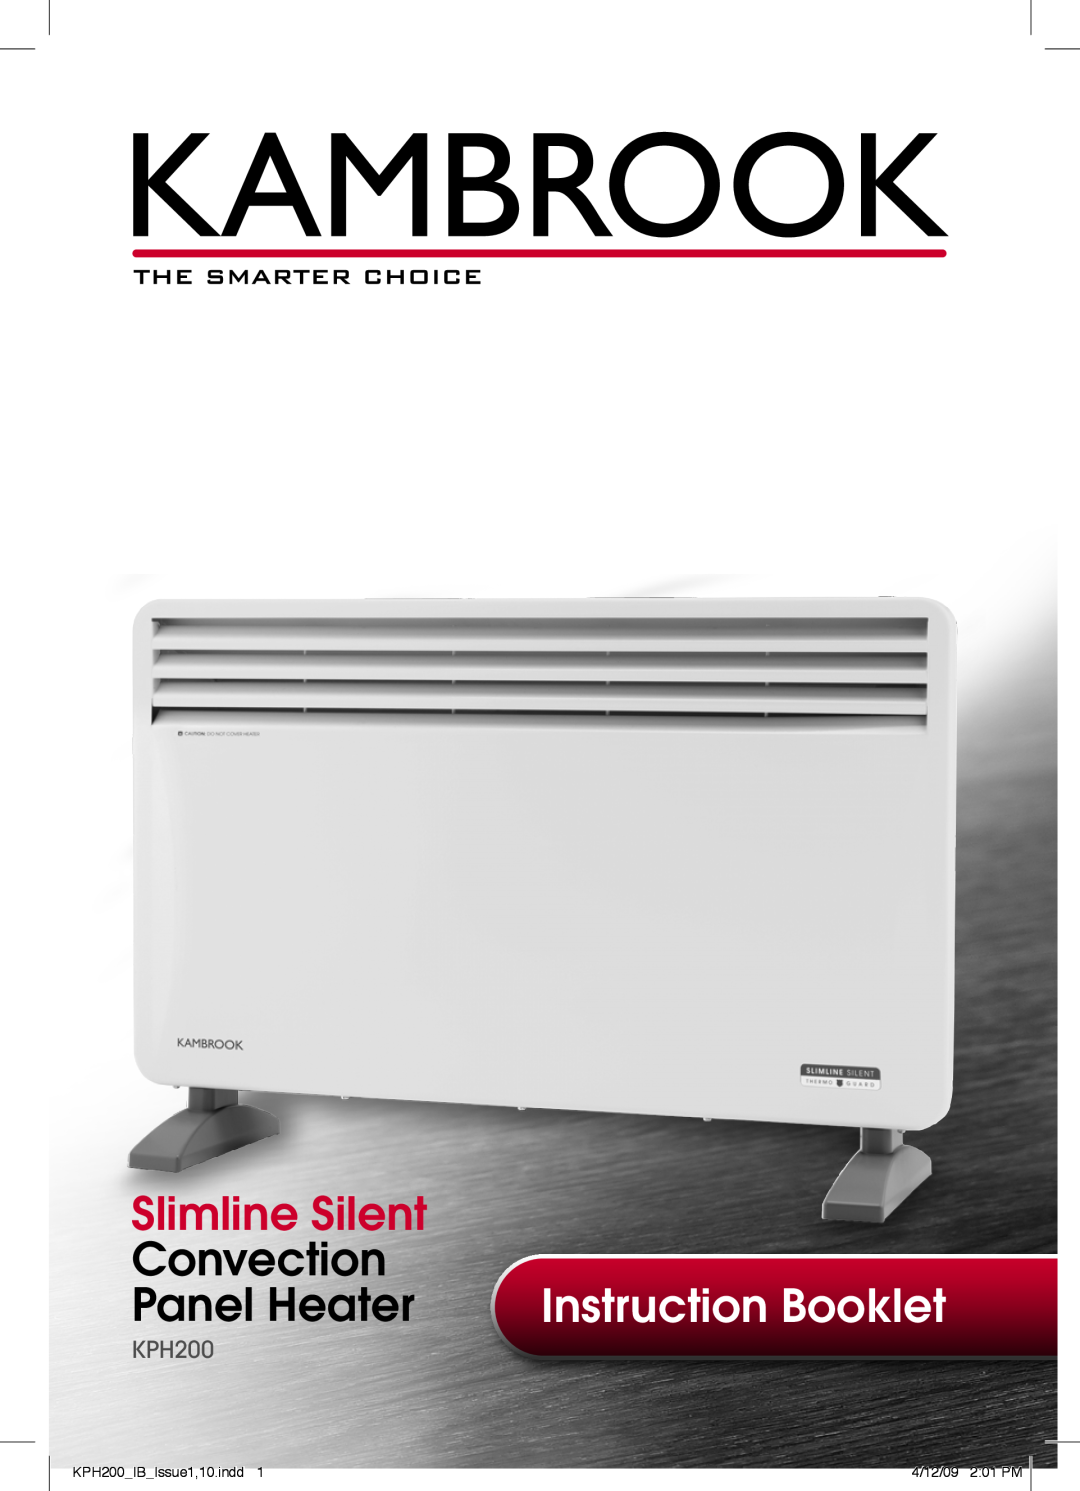 Kambrook manual Slimline Silent, Convection, Panel Heater, Instruction Booklet, KPH200 IB Issue1,10.indd 